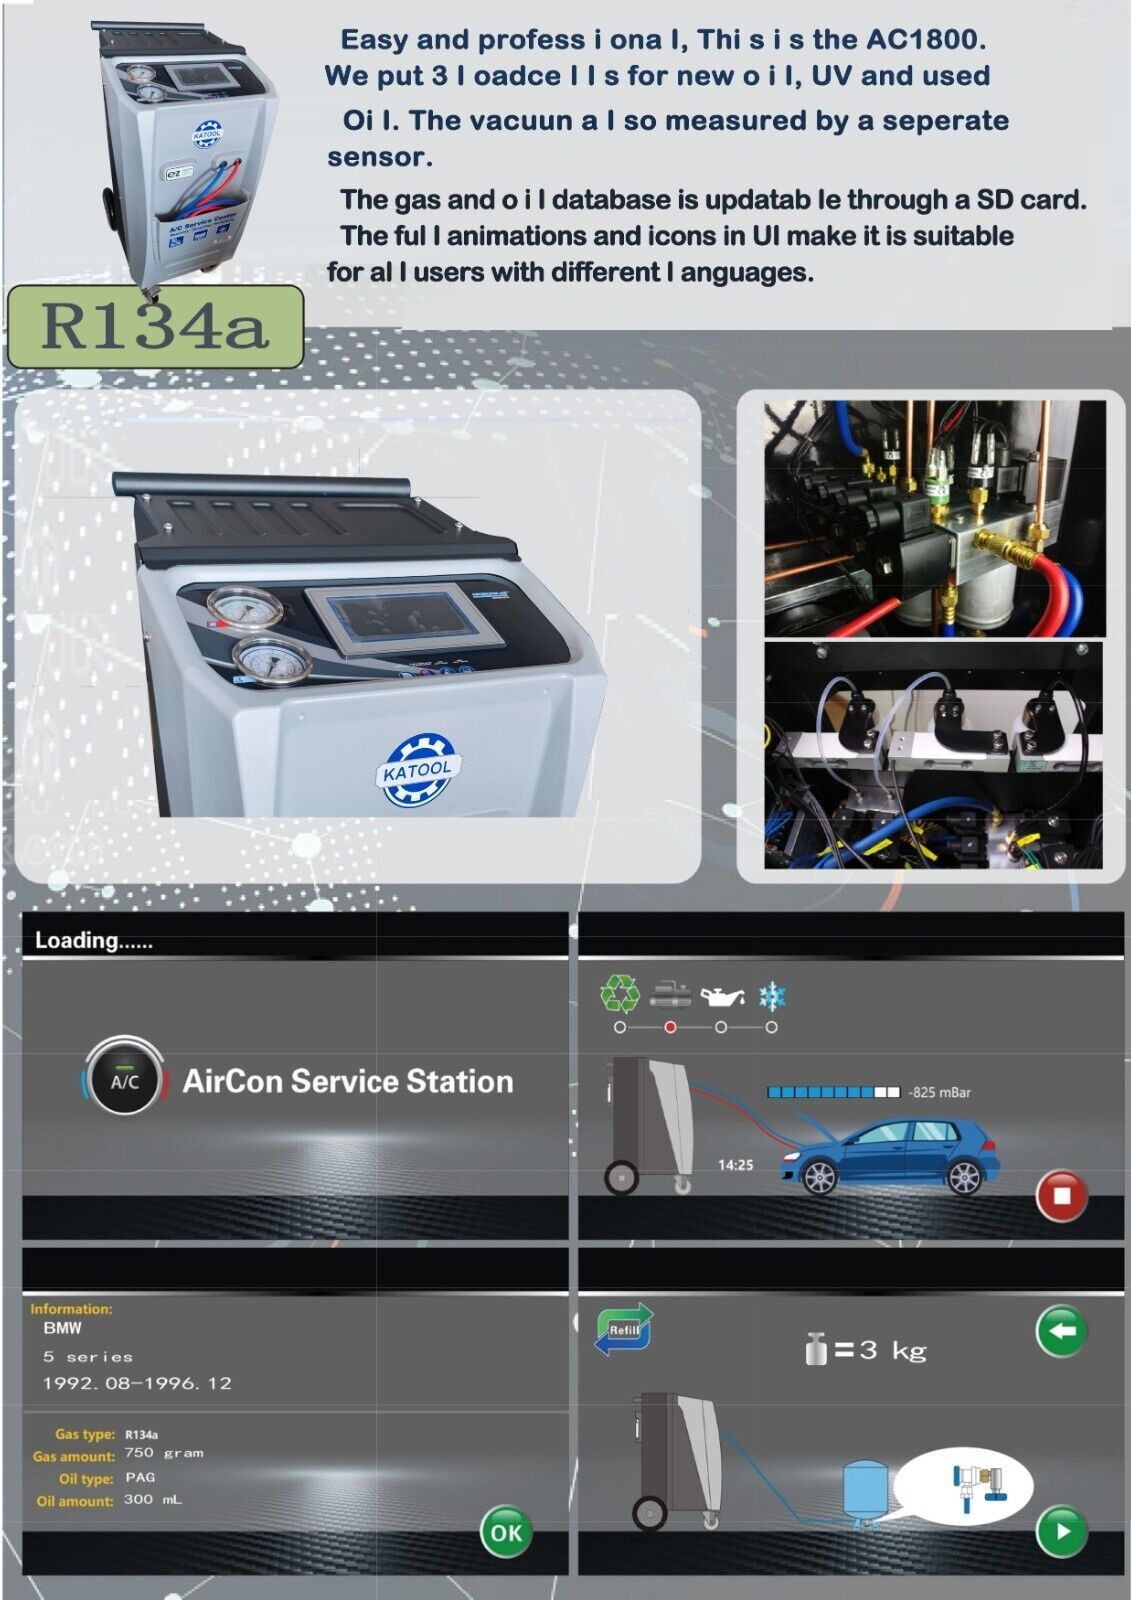 Fully Automatic R-134A Recovery, Recycle & Recharge DUAL AC1800 Machine